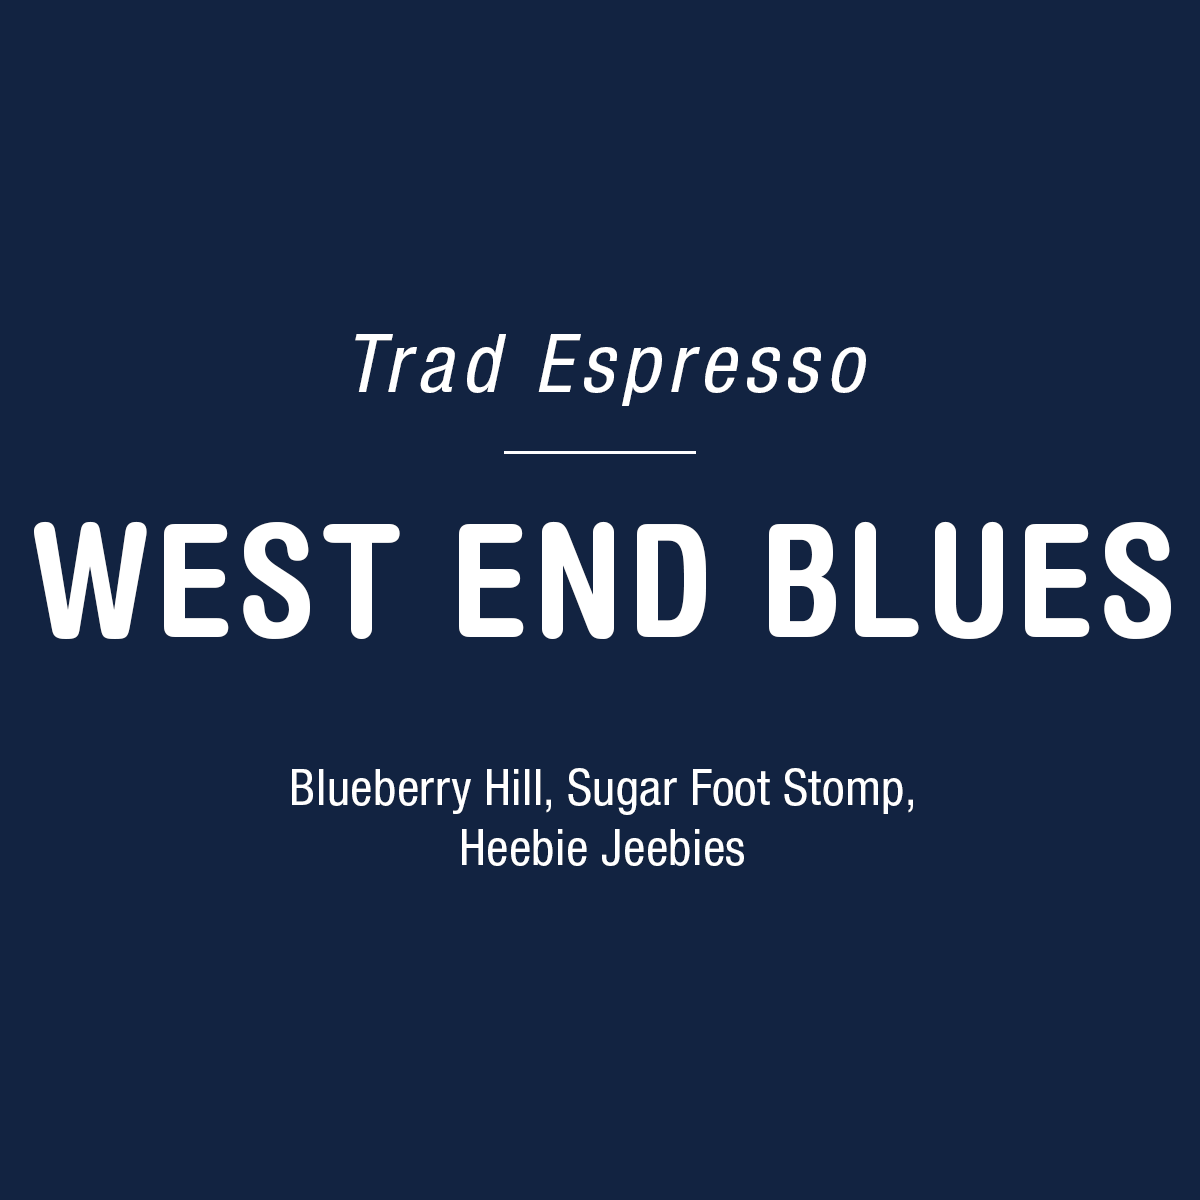 A graphic image with text on a dark blue background. Text reads "Tandem Coffee Roasters espresso," with song titles "Blueberry Hill," "Sugar Foot Stomp," and "Heebie Jee".